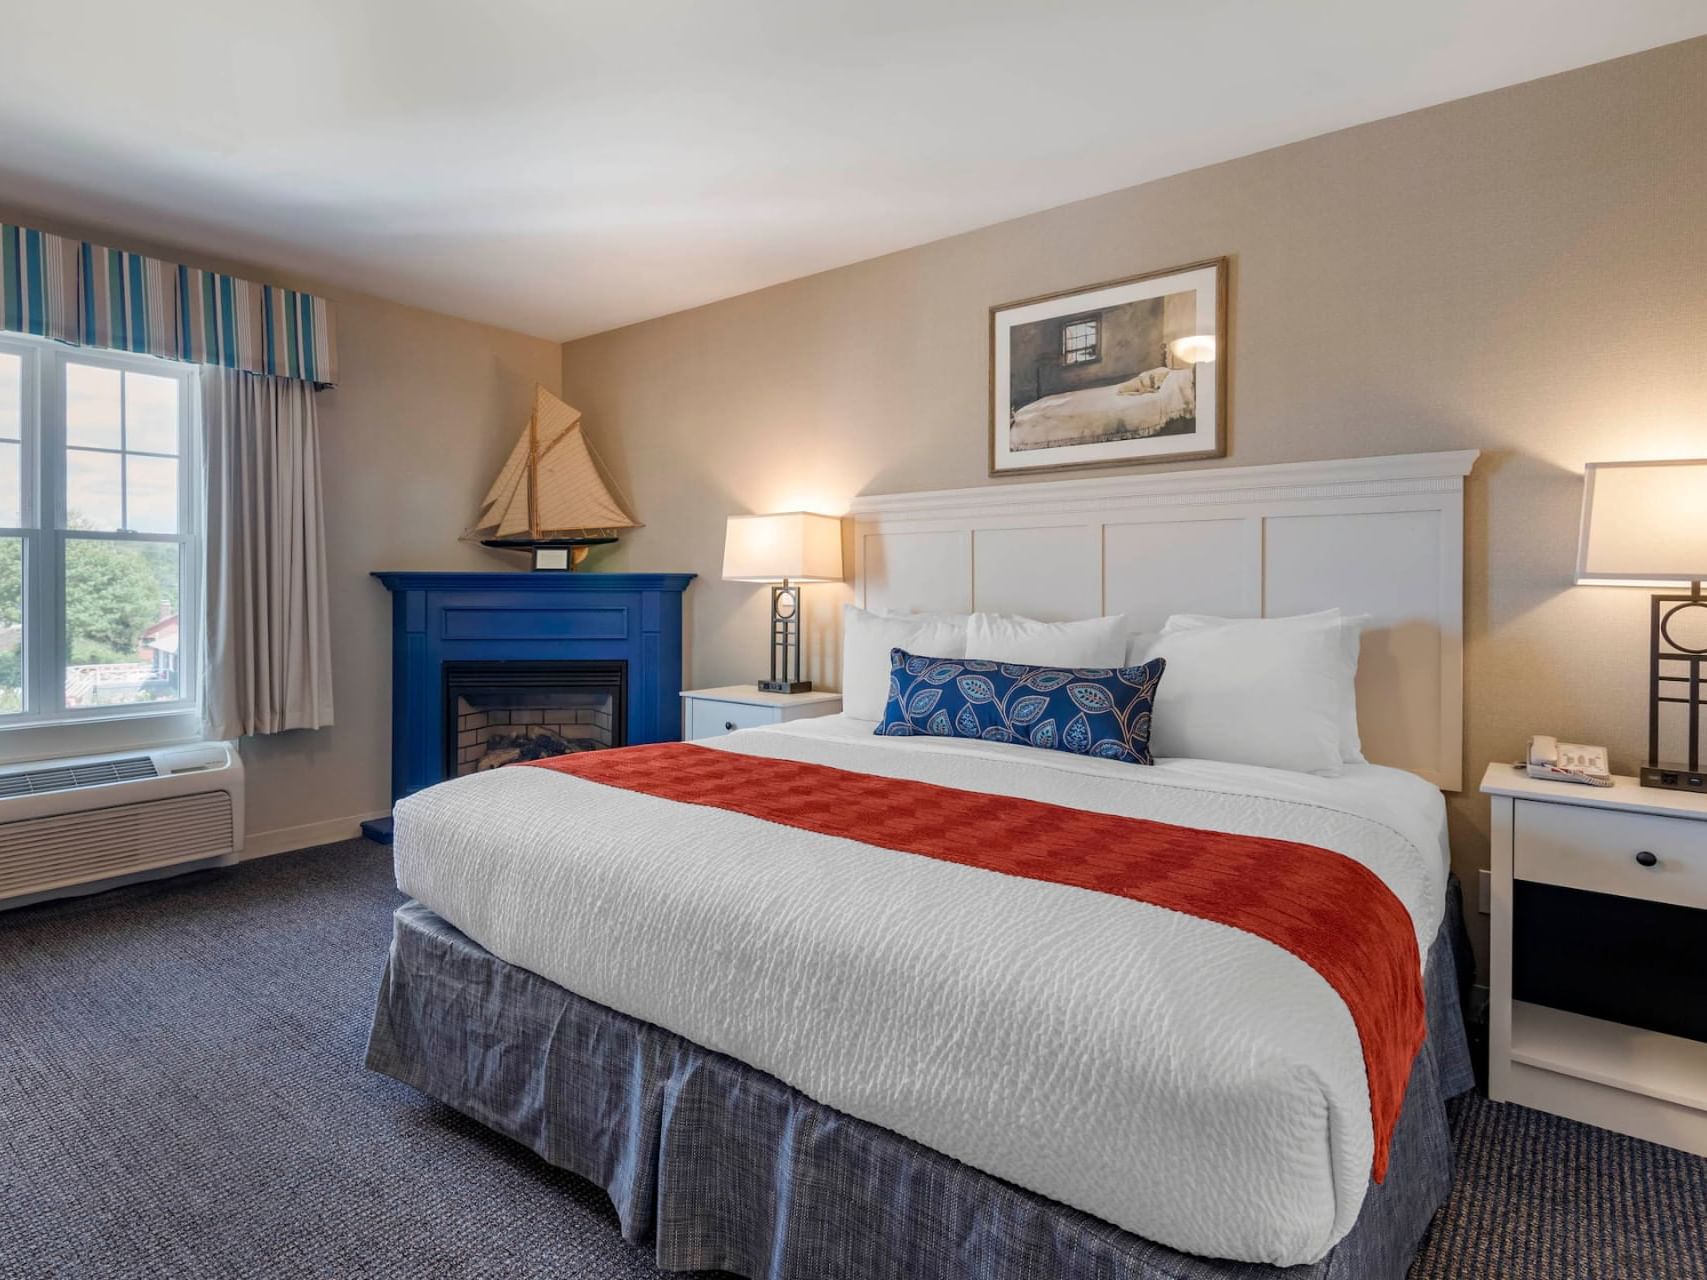 Cozy bed and nightstands in Harbor Village Admiral Suite at Sebasco Harbor Resort by Ogunquit Collection